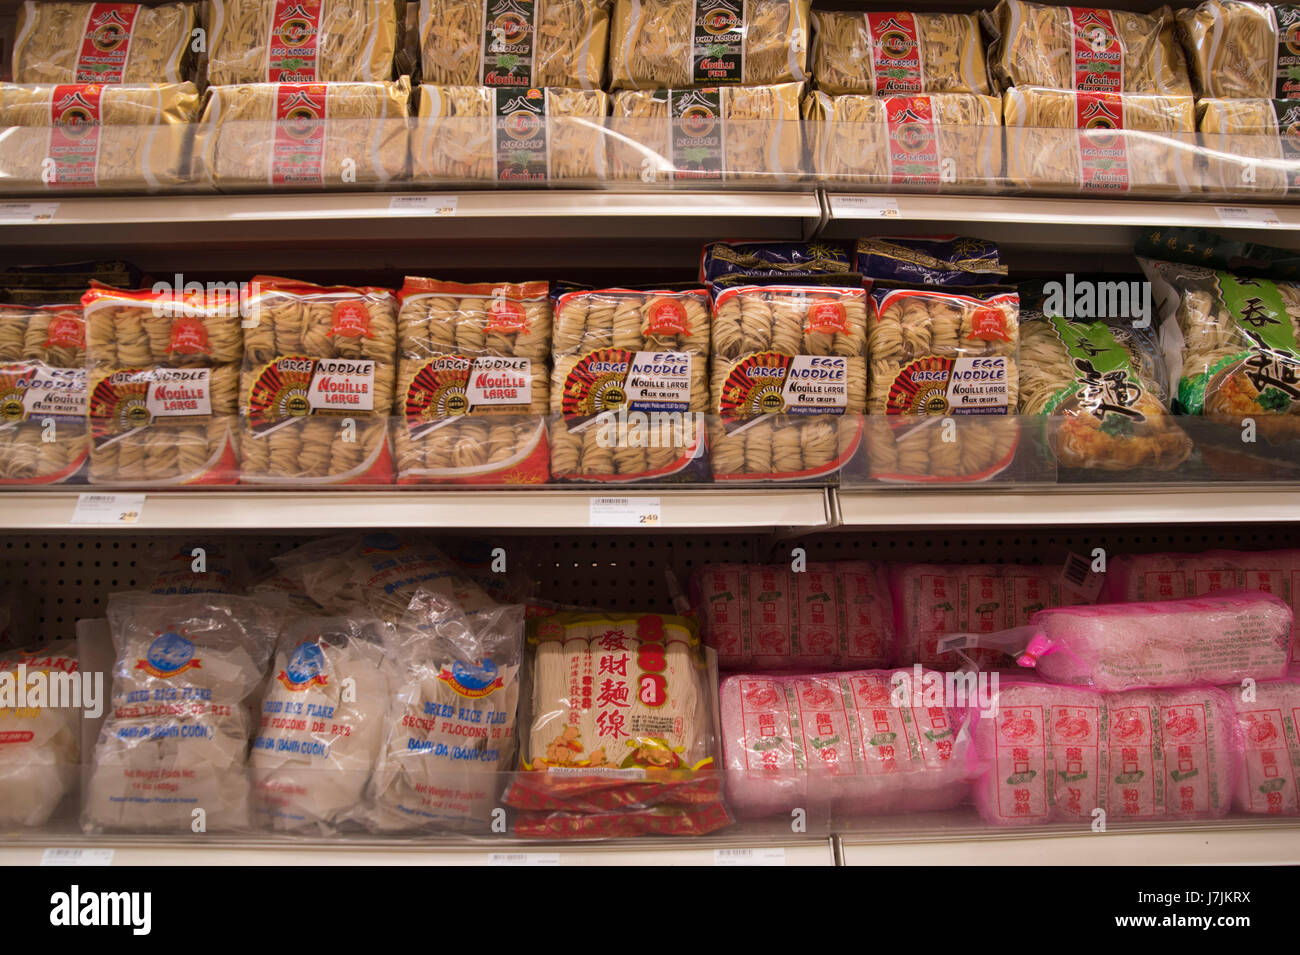 Local asian grocer has aisle of packaged foods, various fruits, meats, and colourful sweet treats. A local store providing foods from other countries. Stock Photo